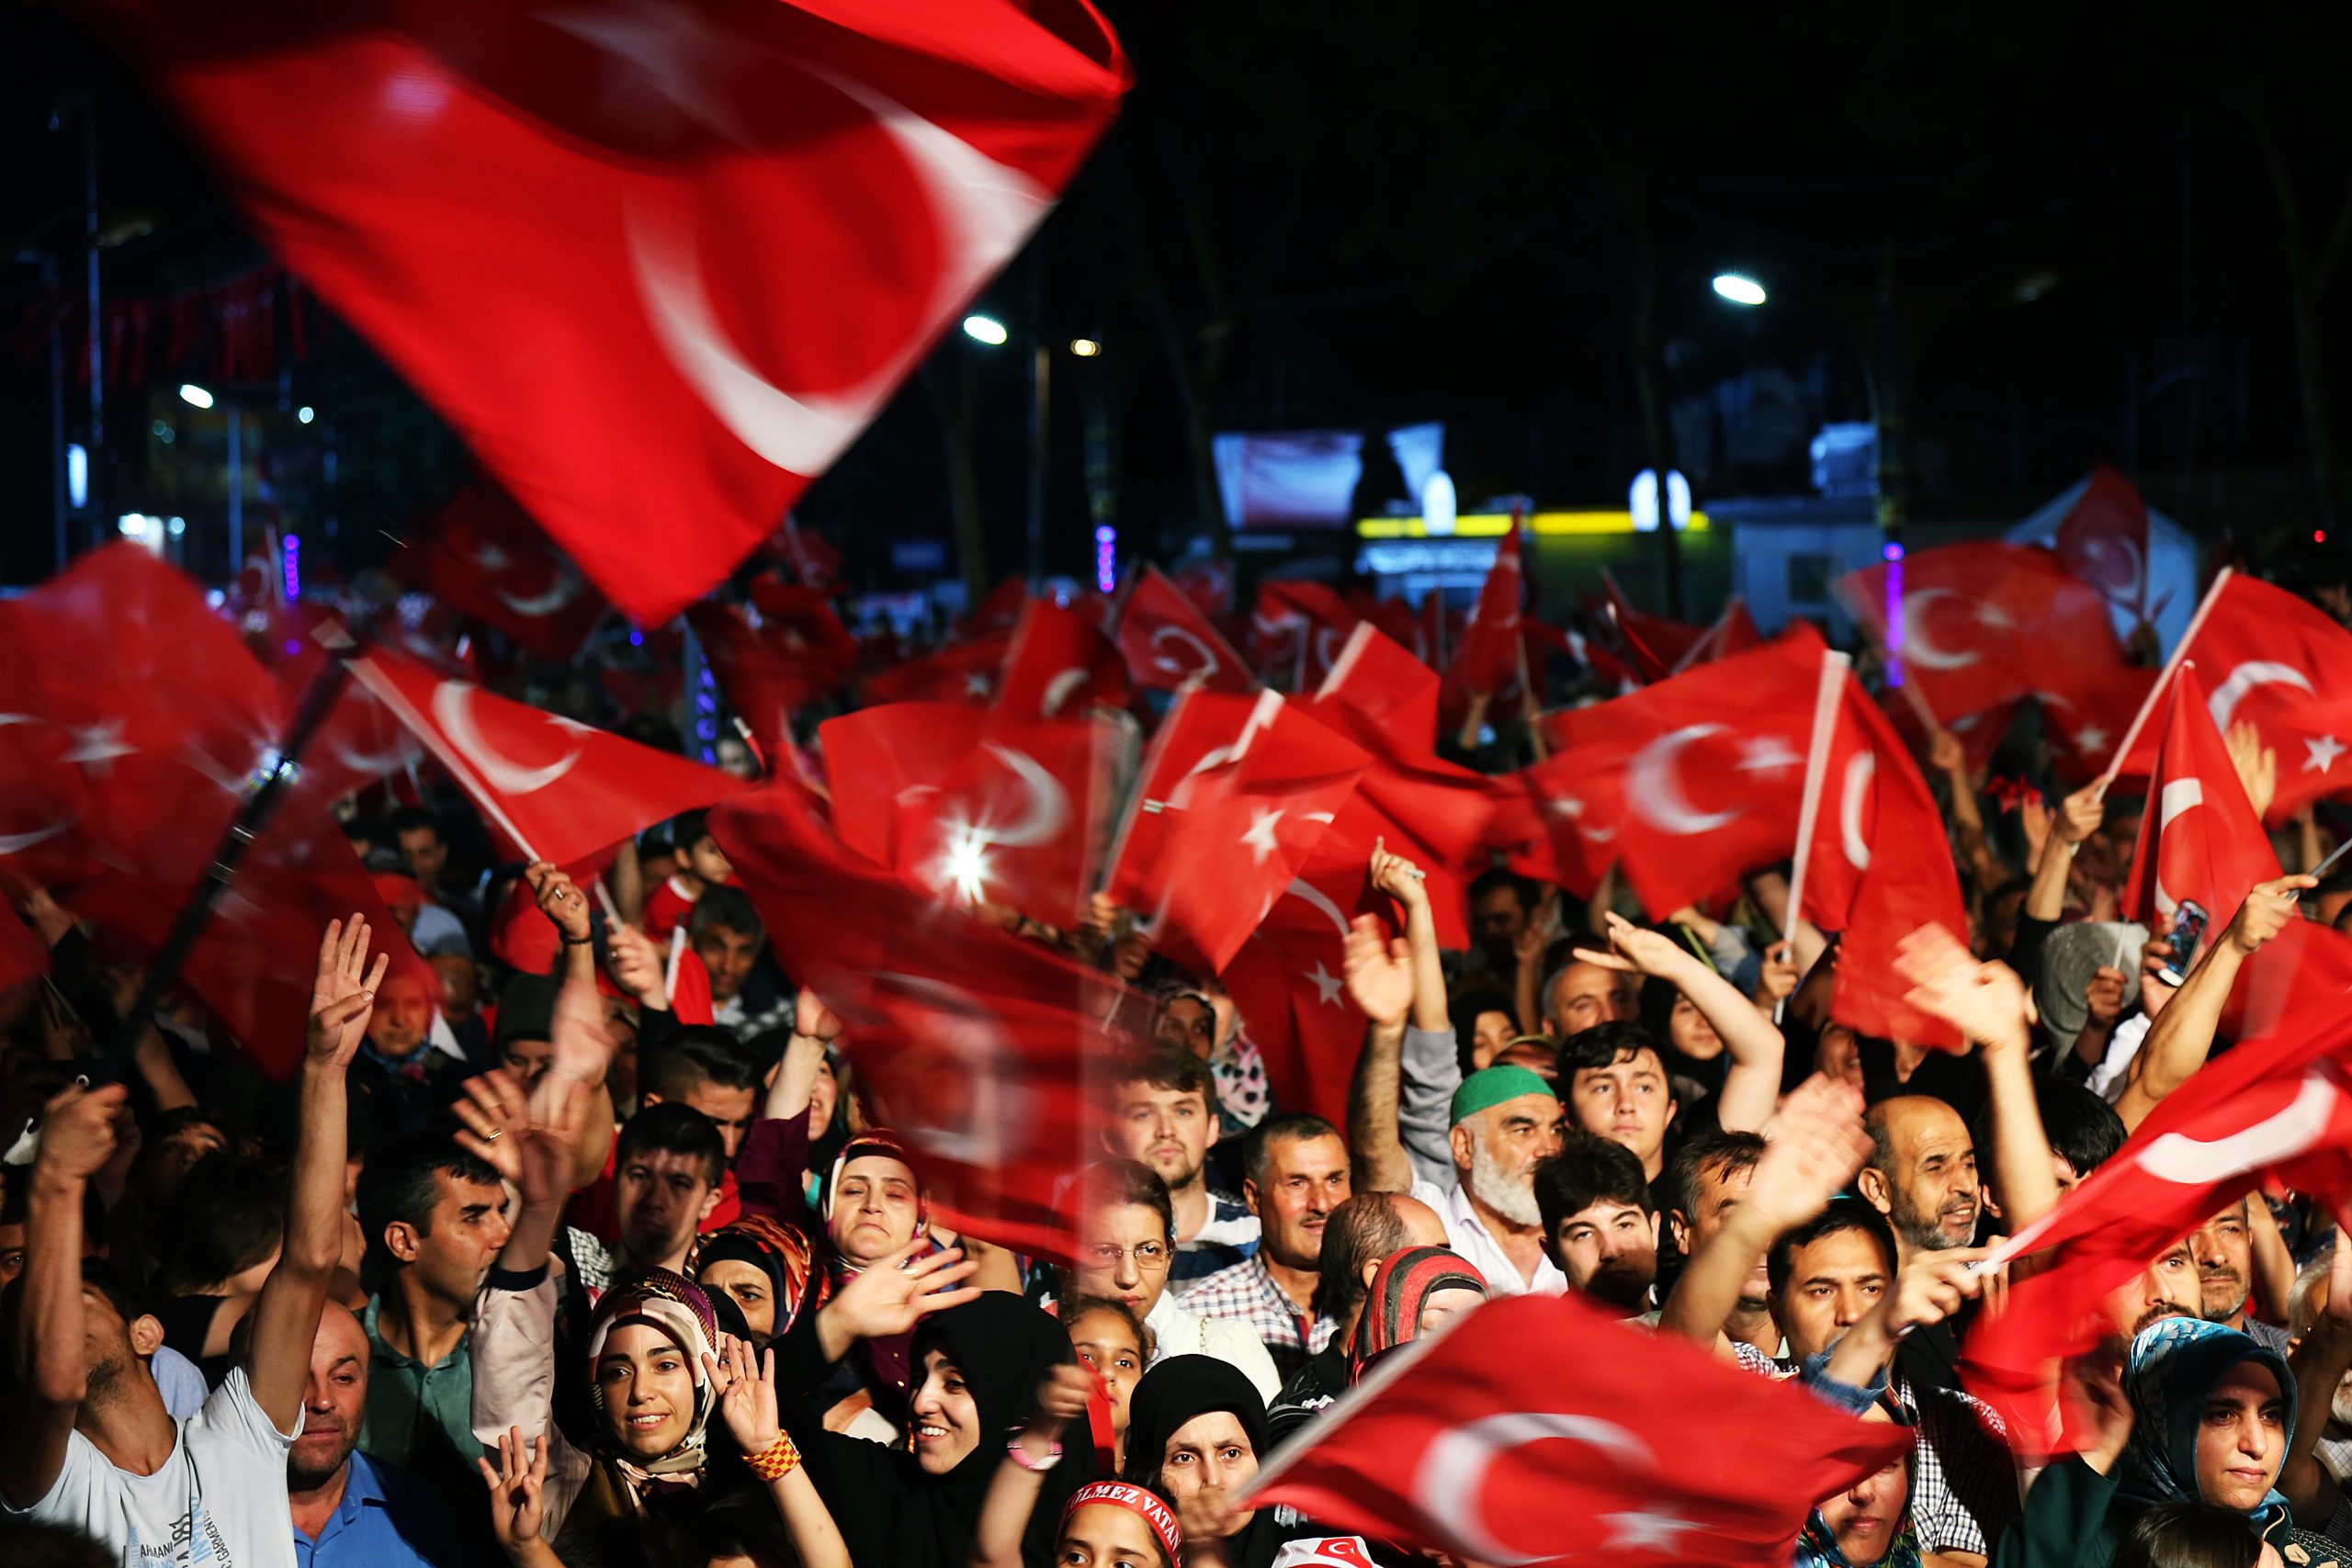 Should business leaders speak out on the Turkish election?